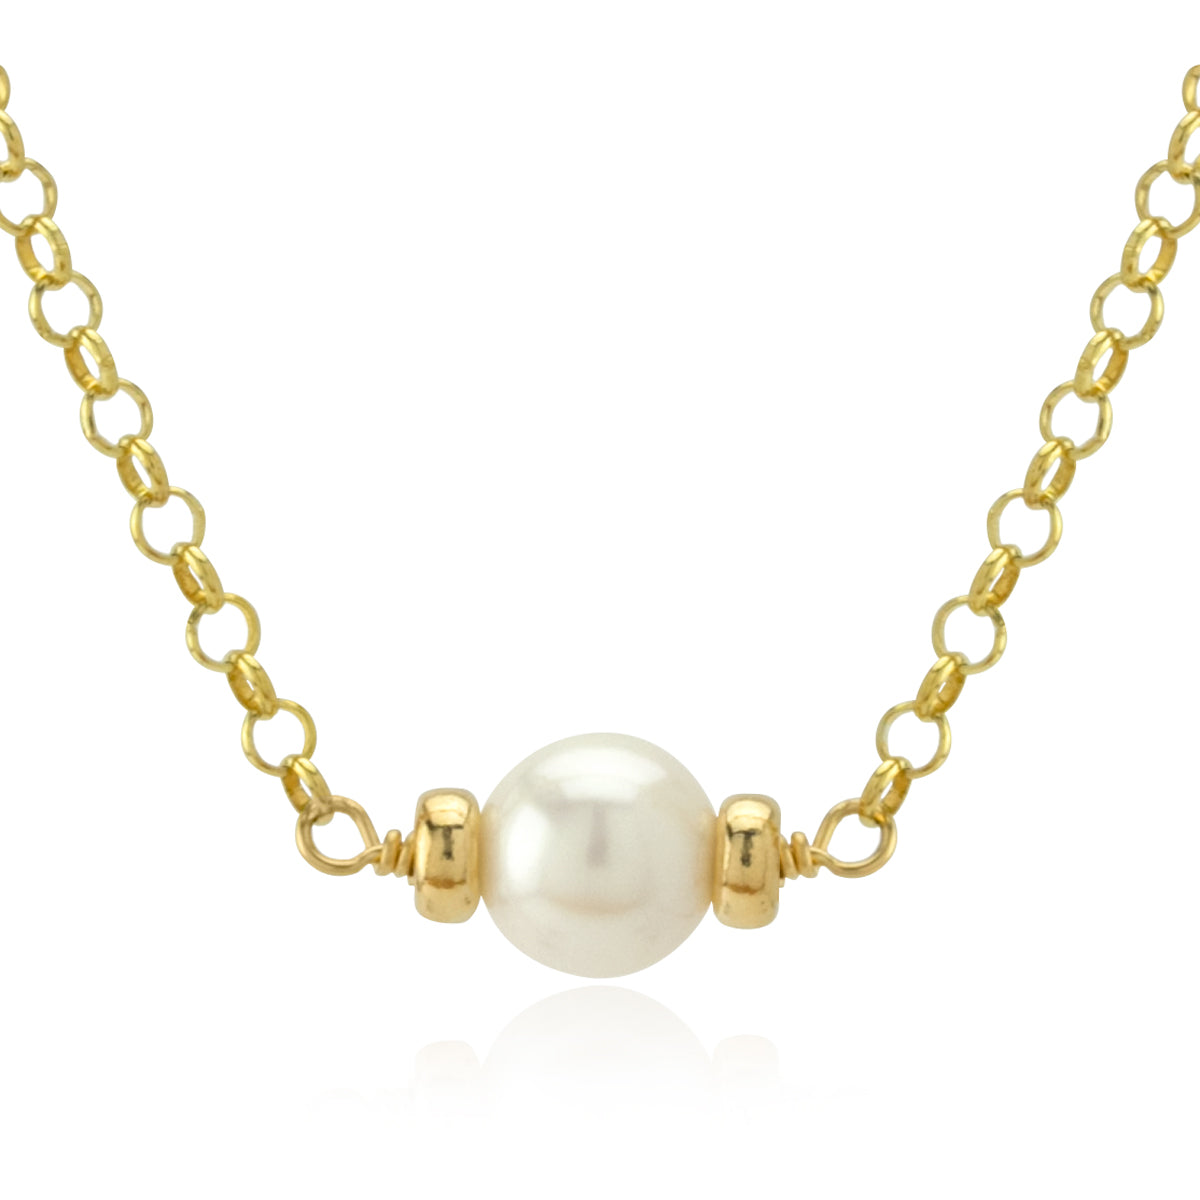 7.5mm Single Pearl Necklace